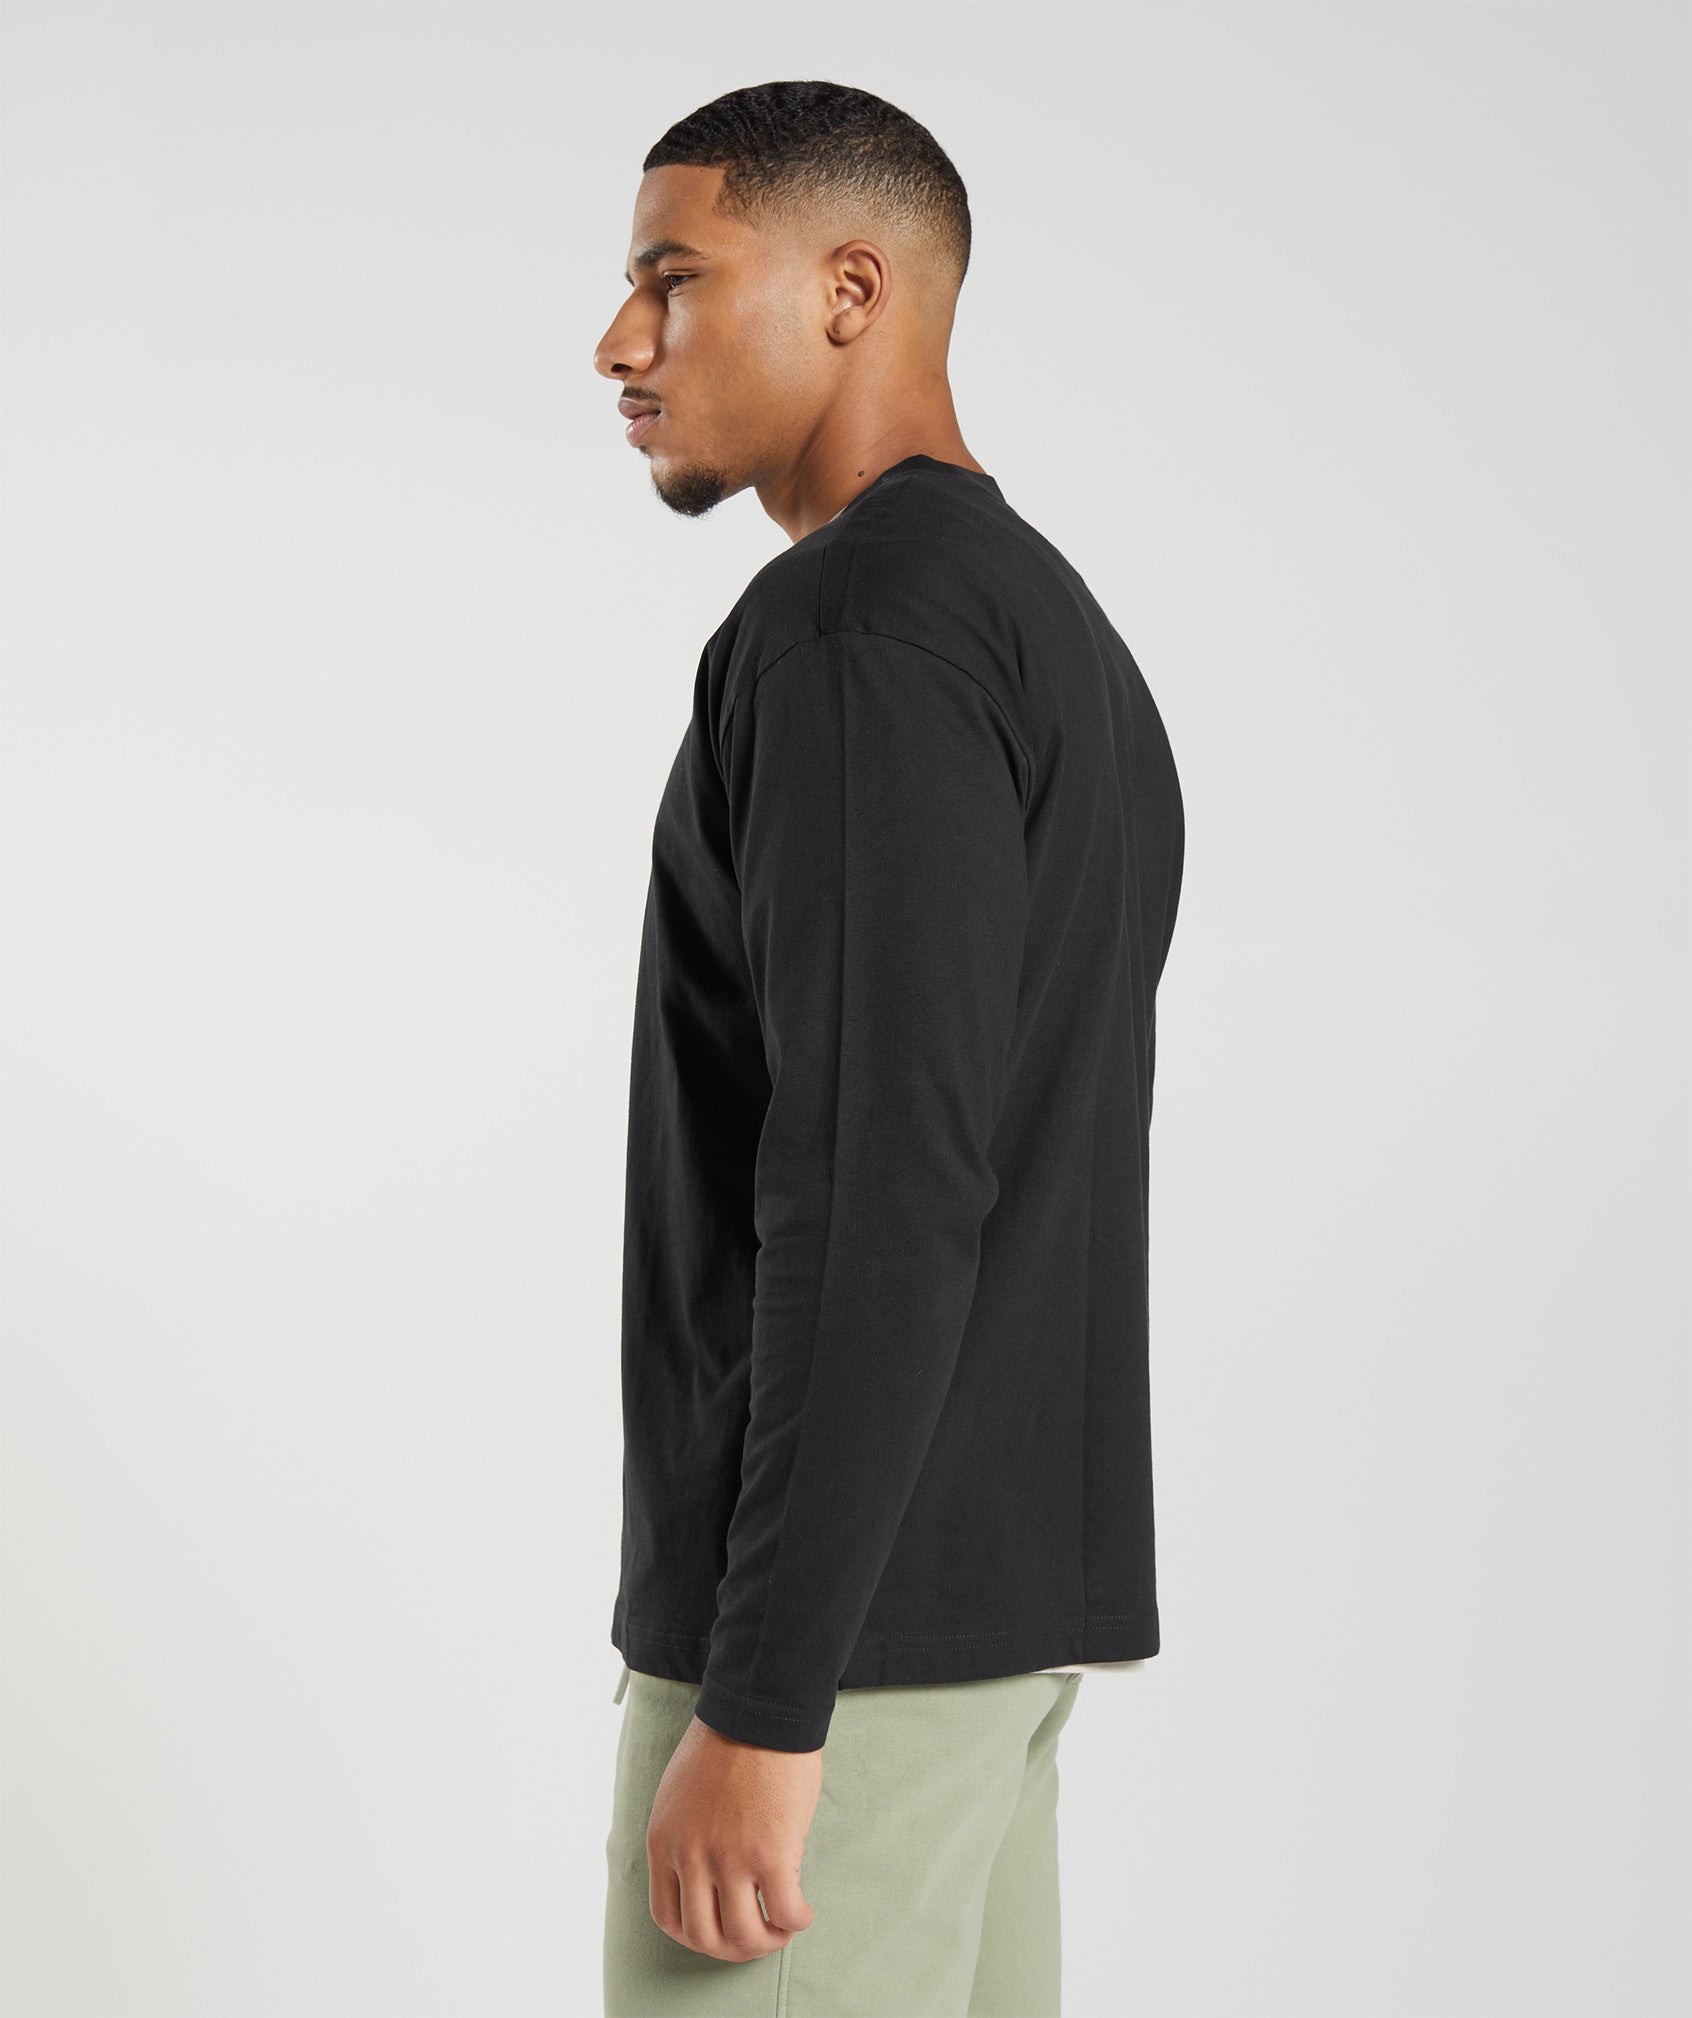 Rest Day Sweats Long Sleeve T-Shirt in Black - view 4